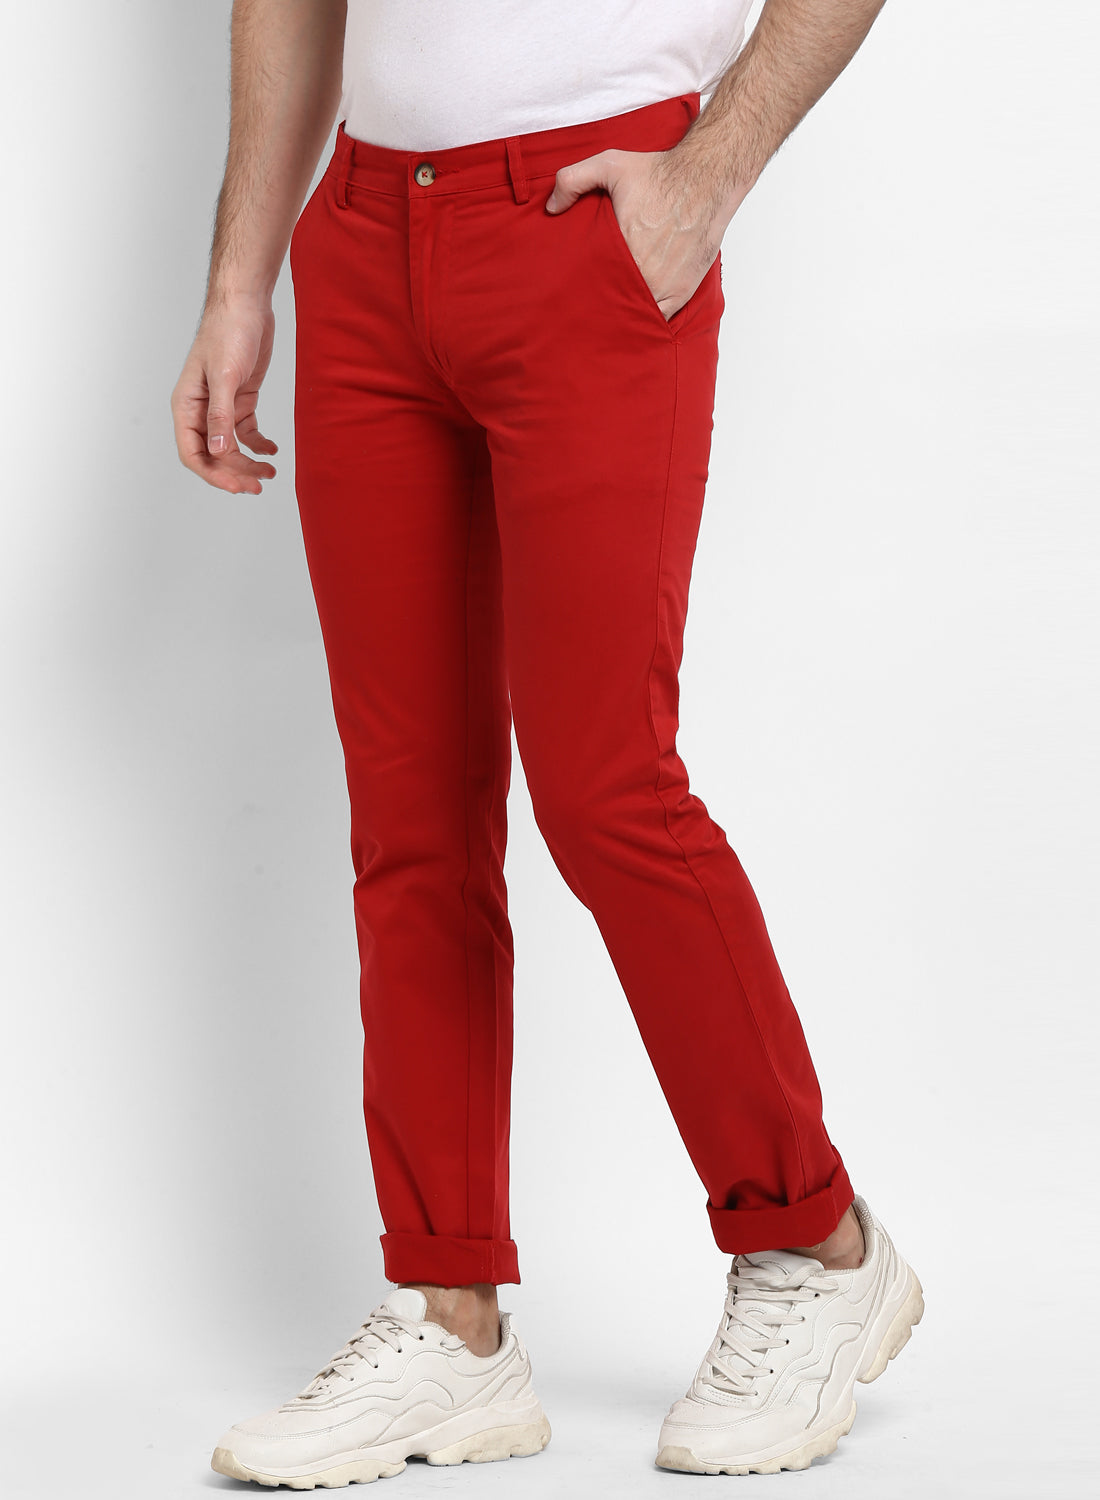 Urbano Fashion Men's Red Cotton Slim Fit Casual Chinos Trousers Stretch